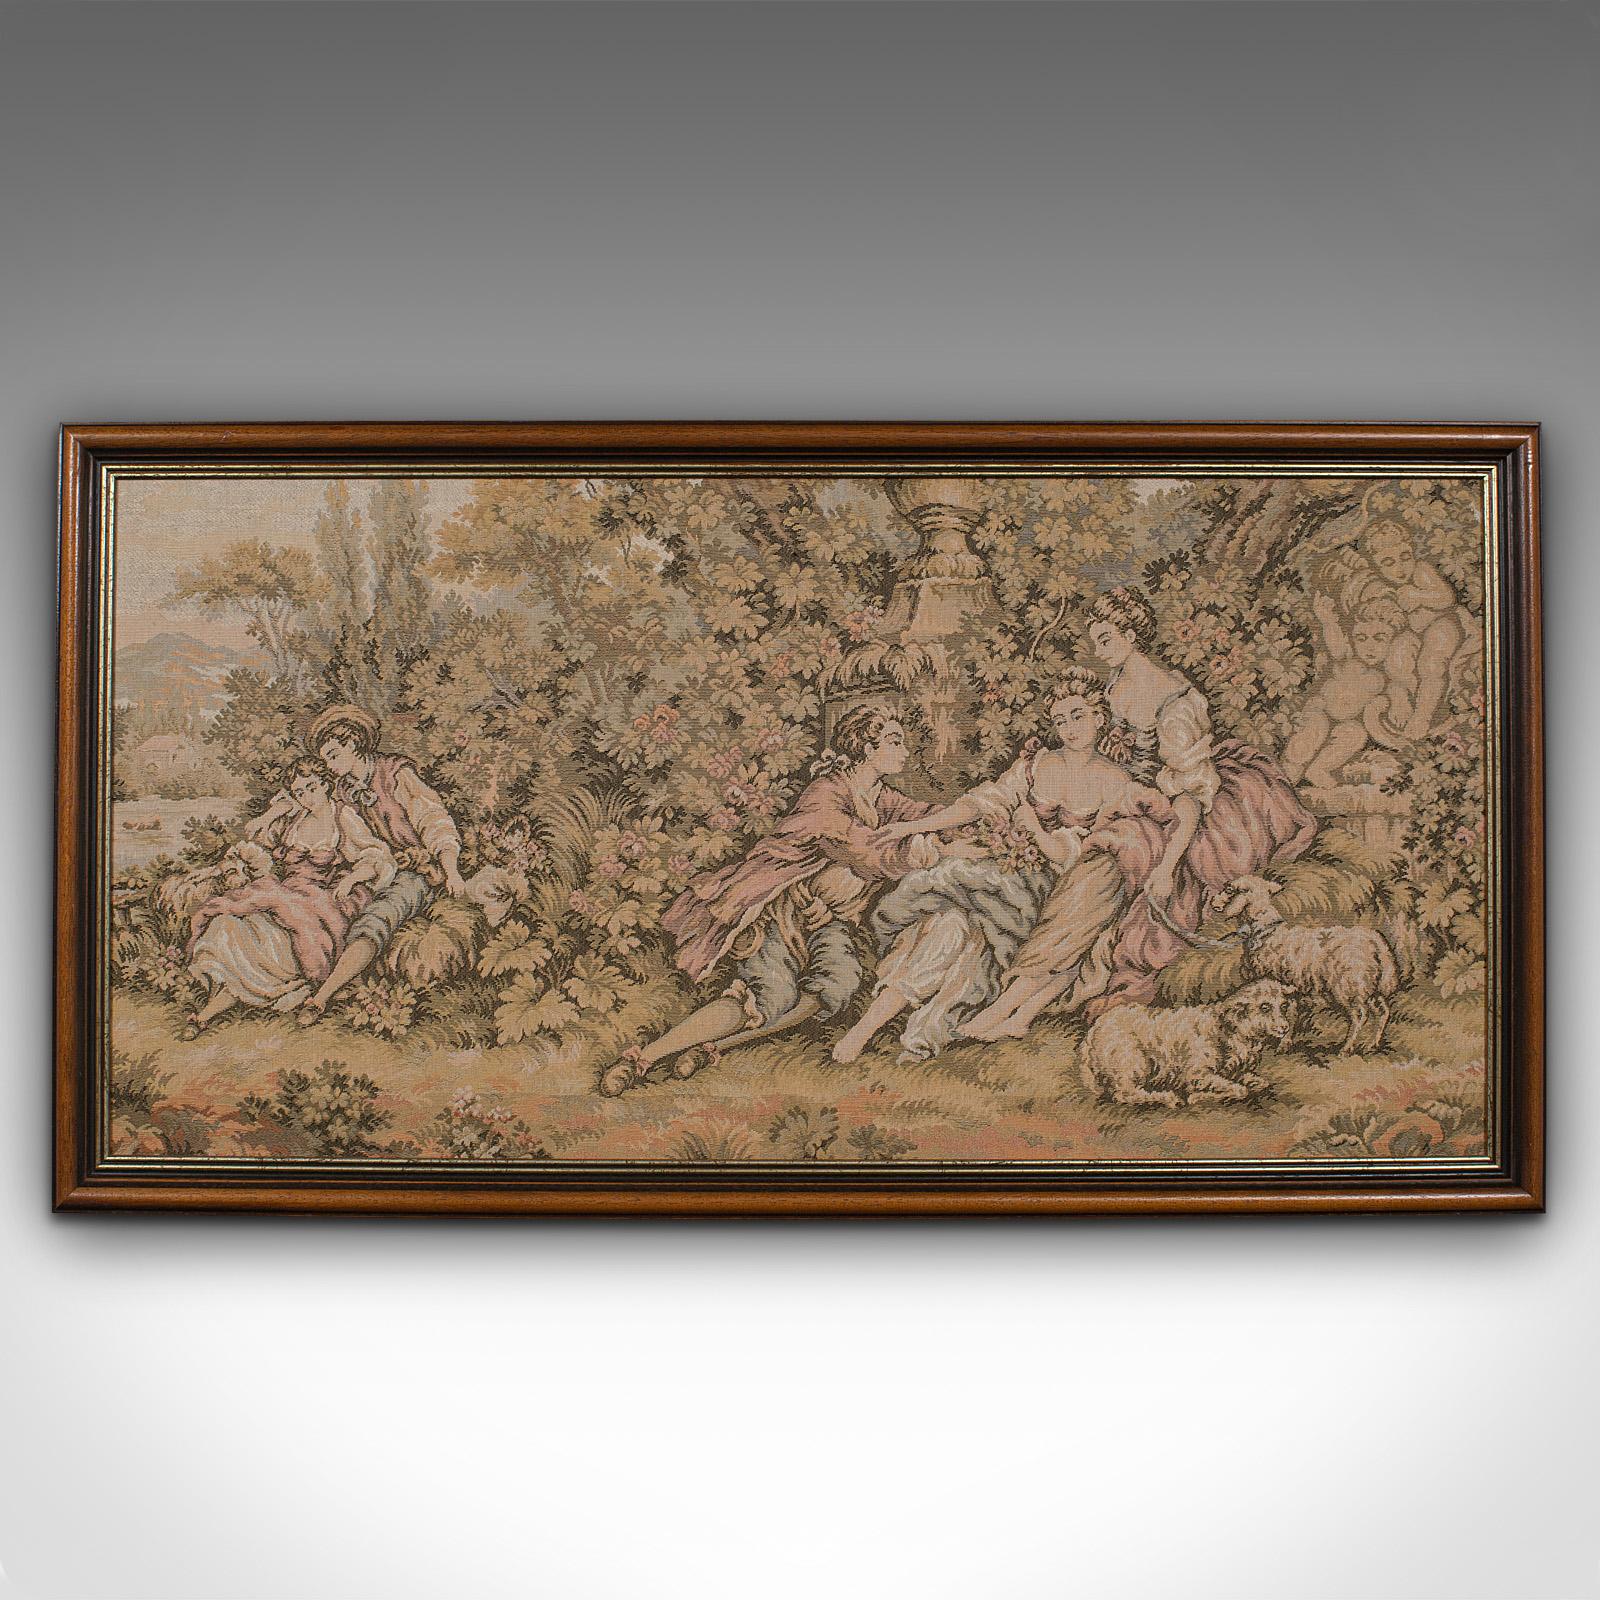 This is a small antique tapestry. A Continental, needlepoint decorative wall panel with mahogany frame, dating to the early 20th century, circa 1920.

Of compact proportion, ideal for the smaller room or nook
Displays a desirable aged patina and